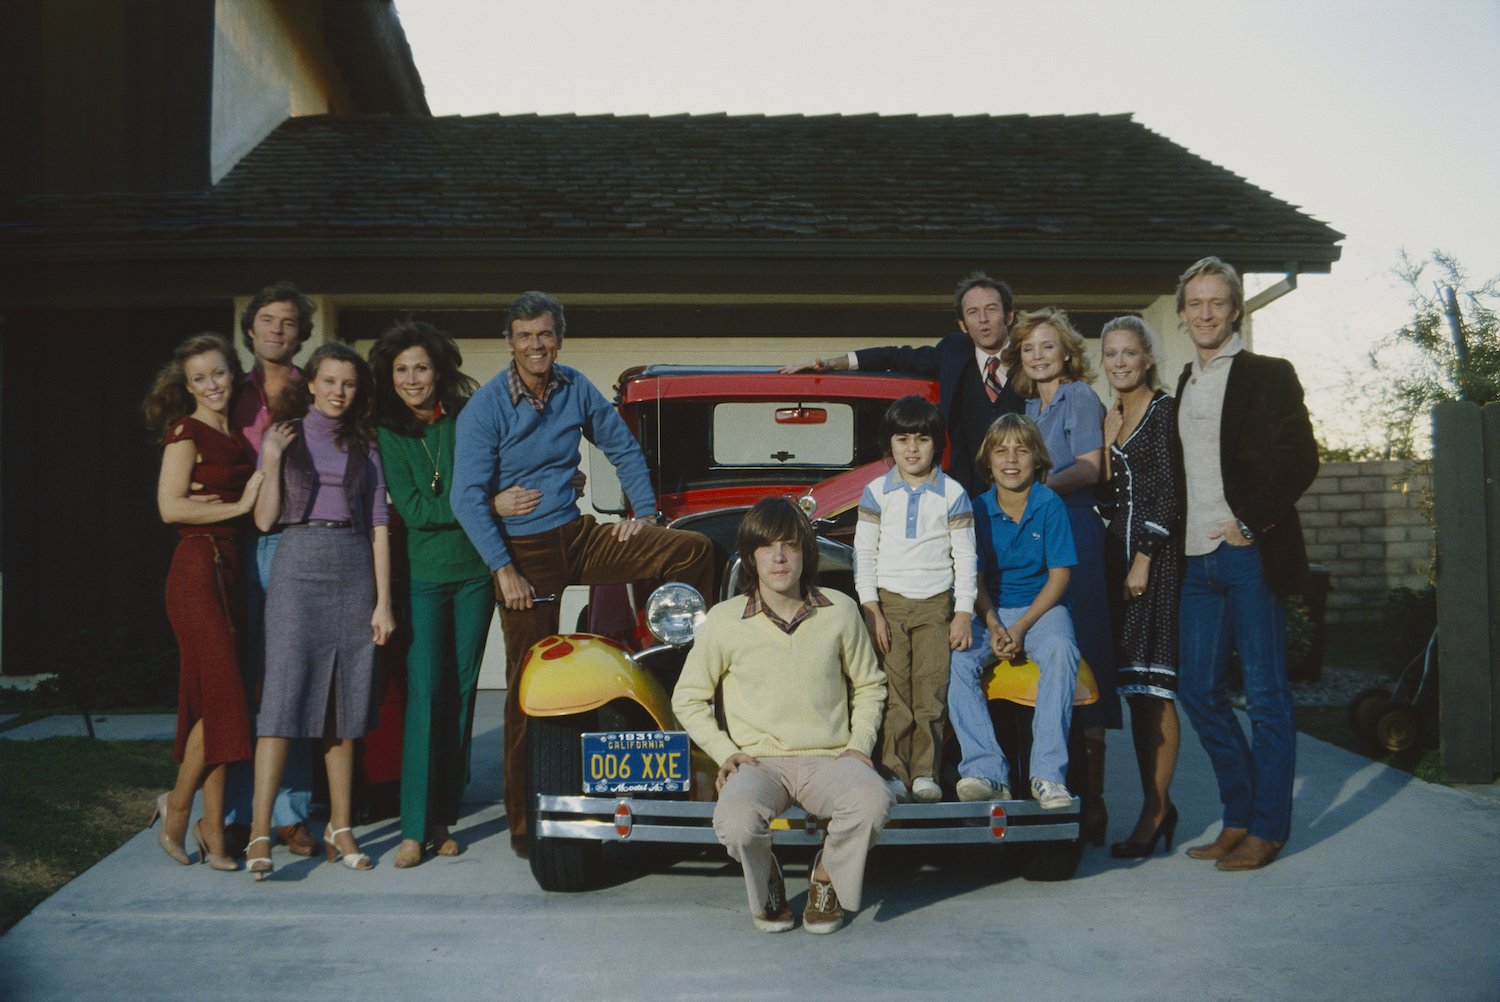 Knots Landing cast surrounding a car parked in a driveway smiling at the camera